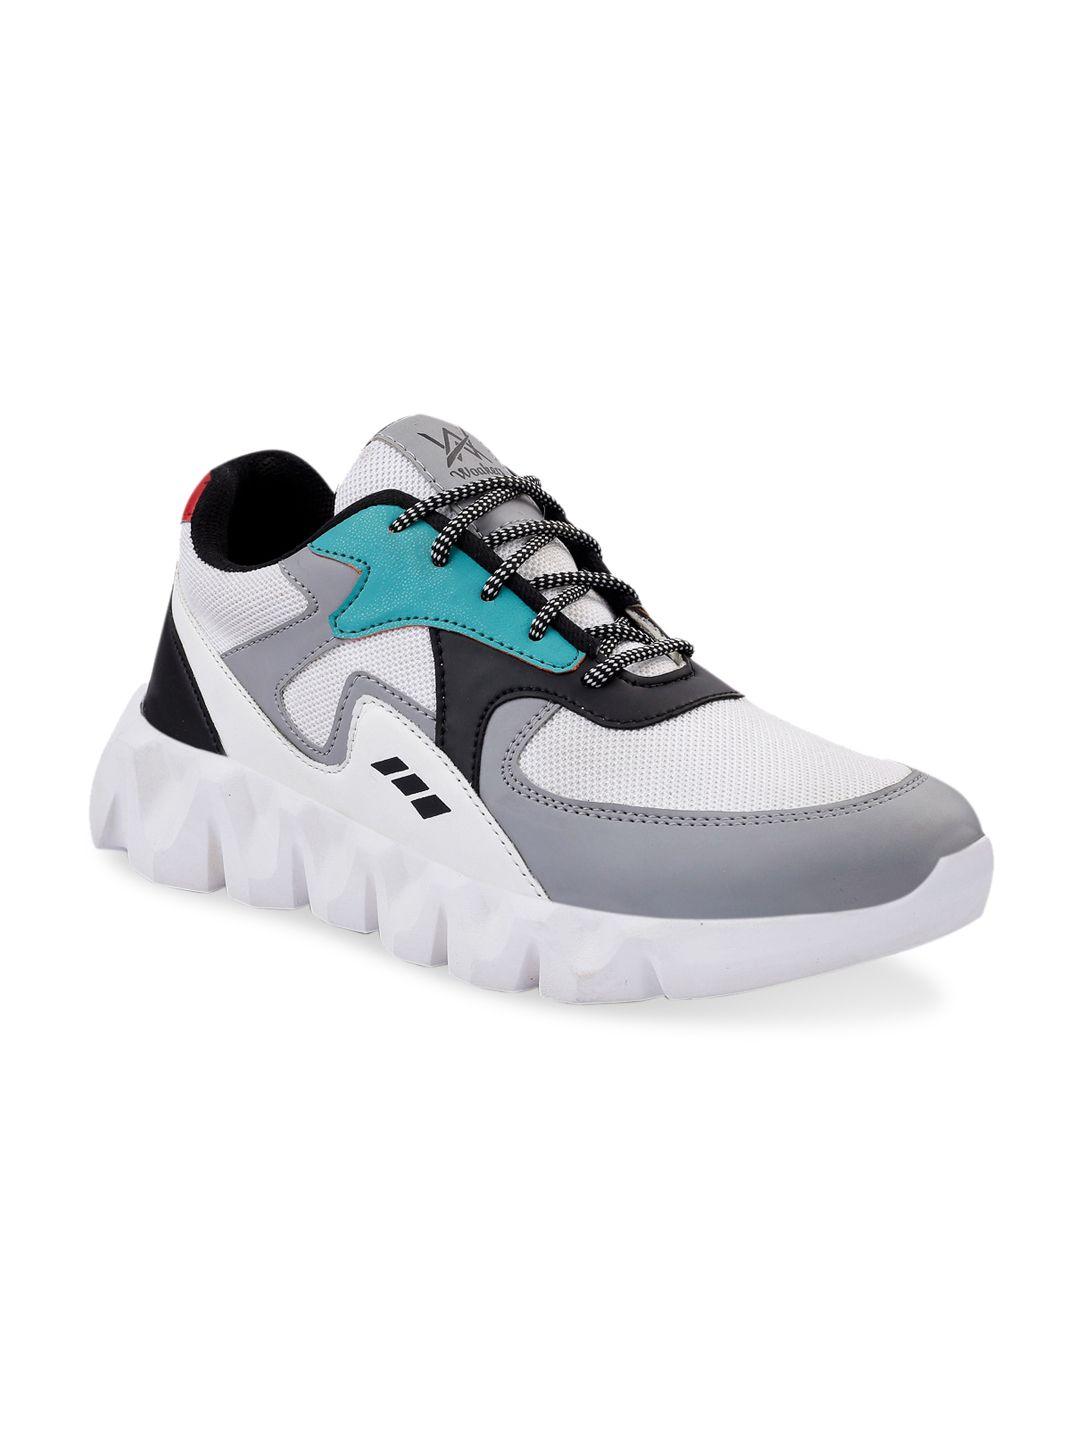 woakers men off-white & grey colourblocked sneakers